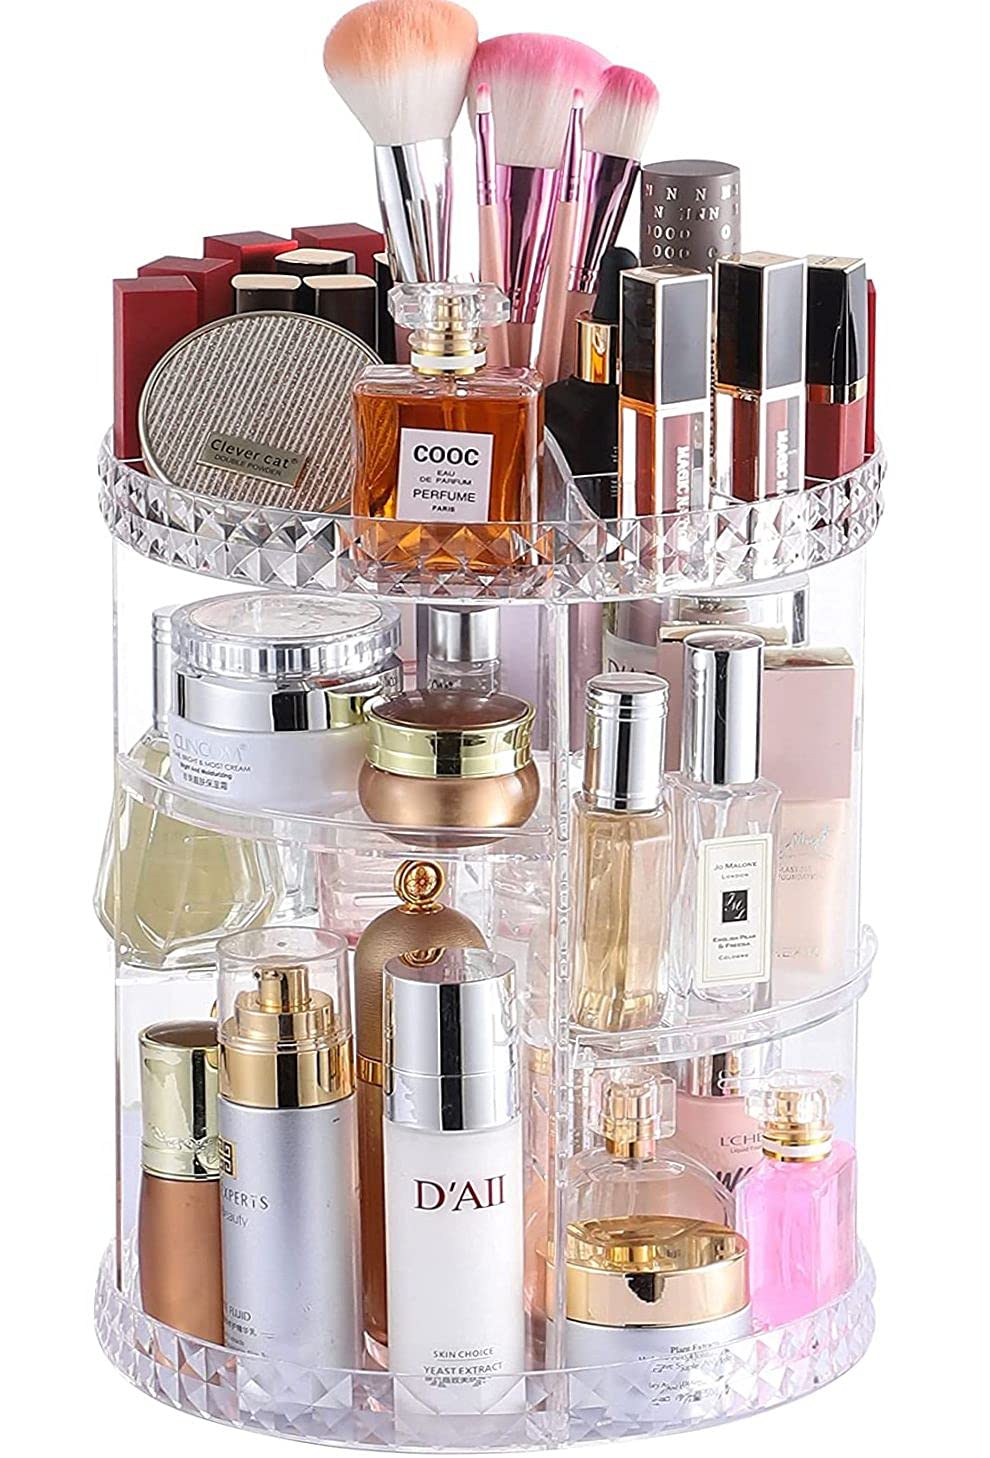 Cq acrylic 360 Degree Rotating Makeup Organizer for Bathroom,4 Tier  Adjustable Spinning Cosmetic Storage Cases and Make Up Holder Display  Cases,Clear, Scove